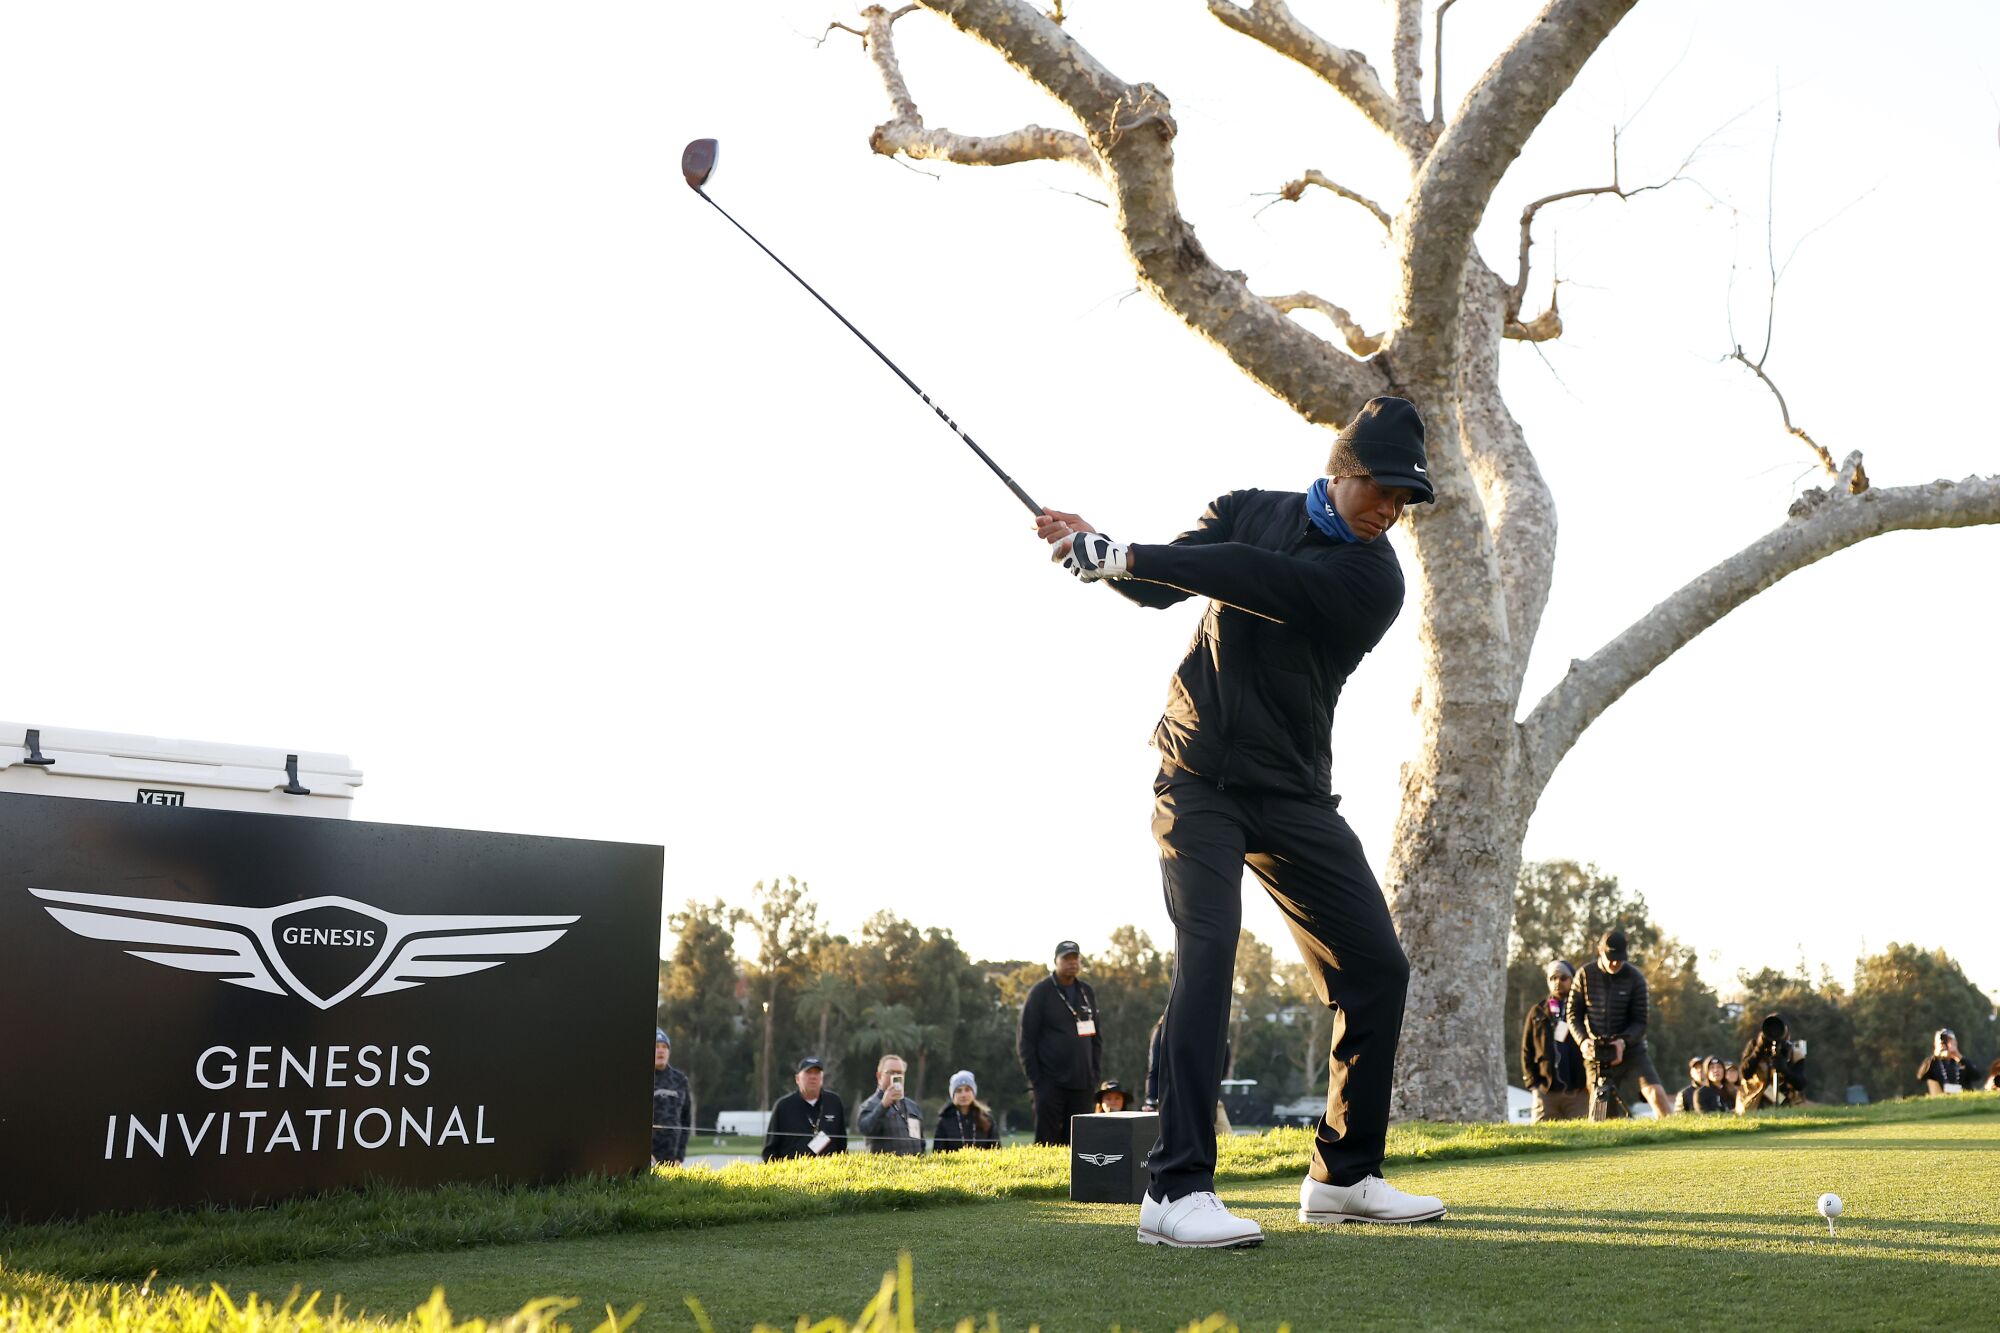 Tiger Woods tees off next to a tree and a Genesis Invitational sign